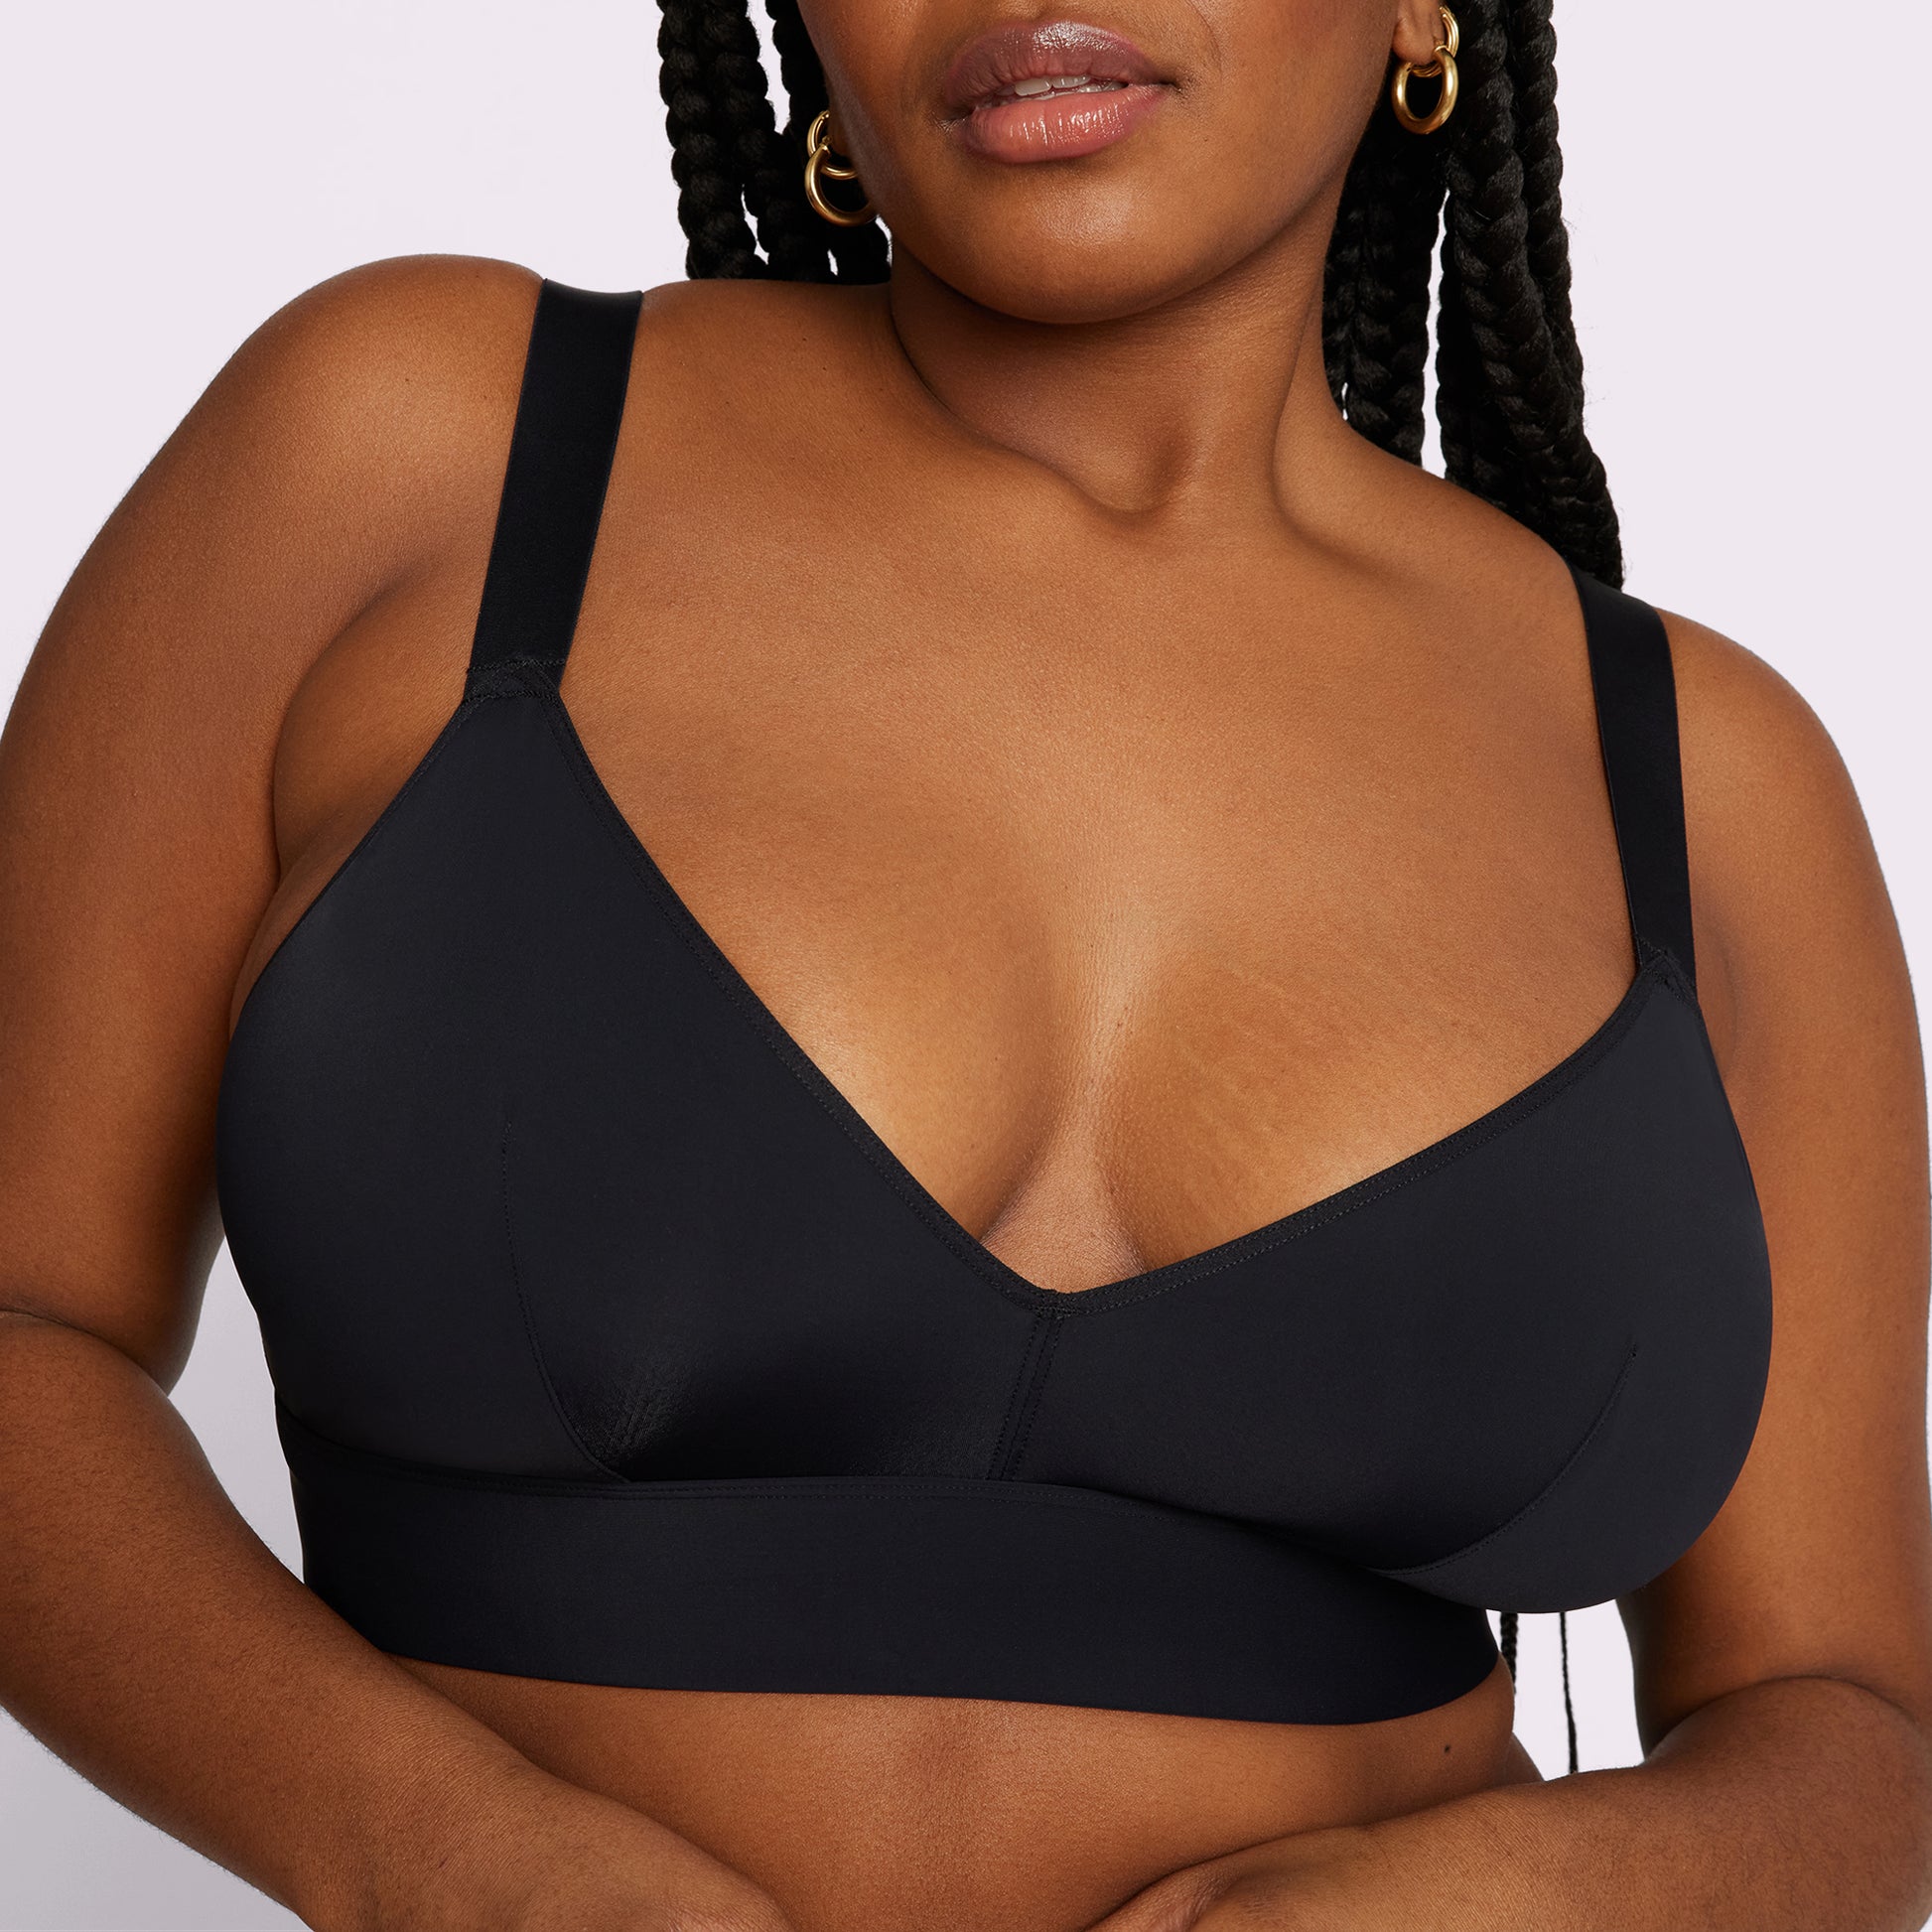 Dream Products Comfort Sleep Bra, Front Closure, Black, Size 34 at